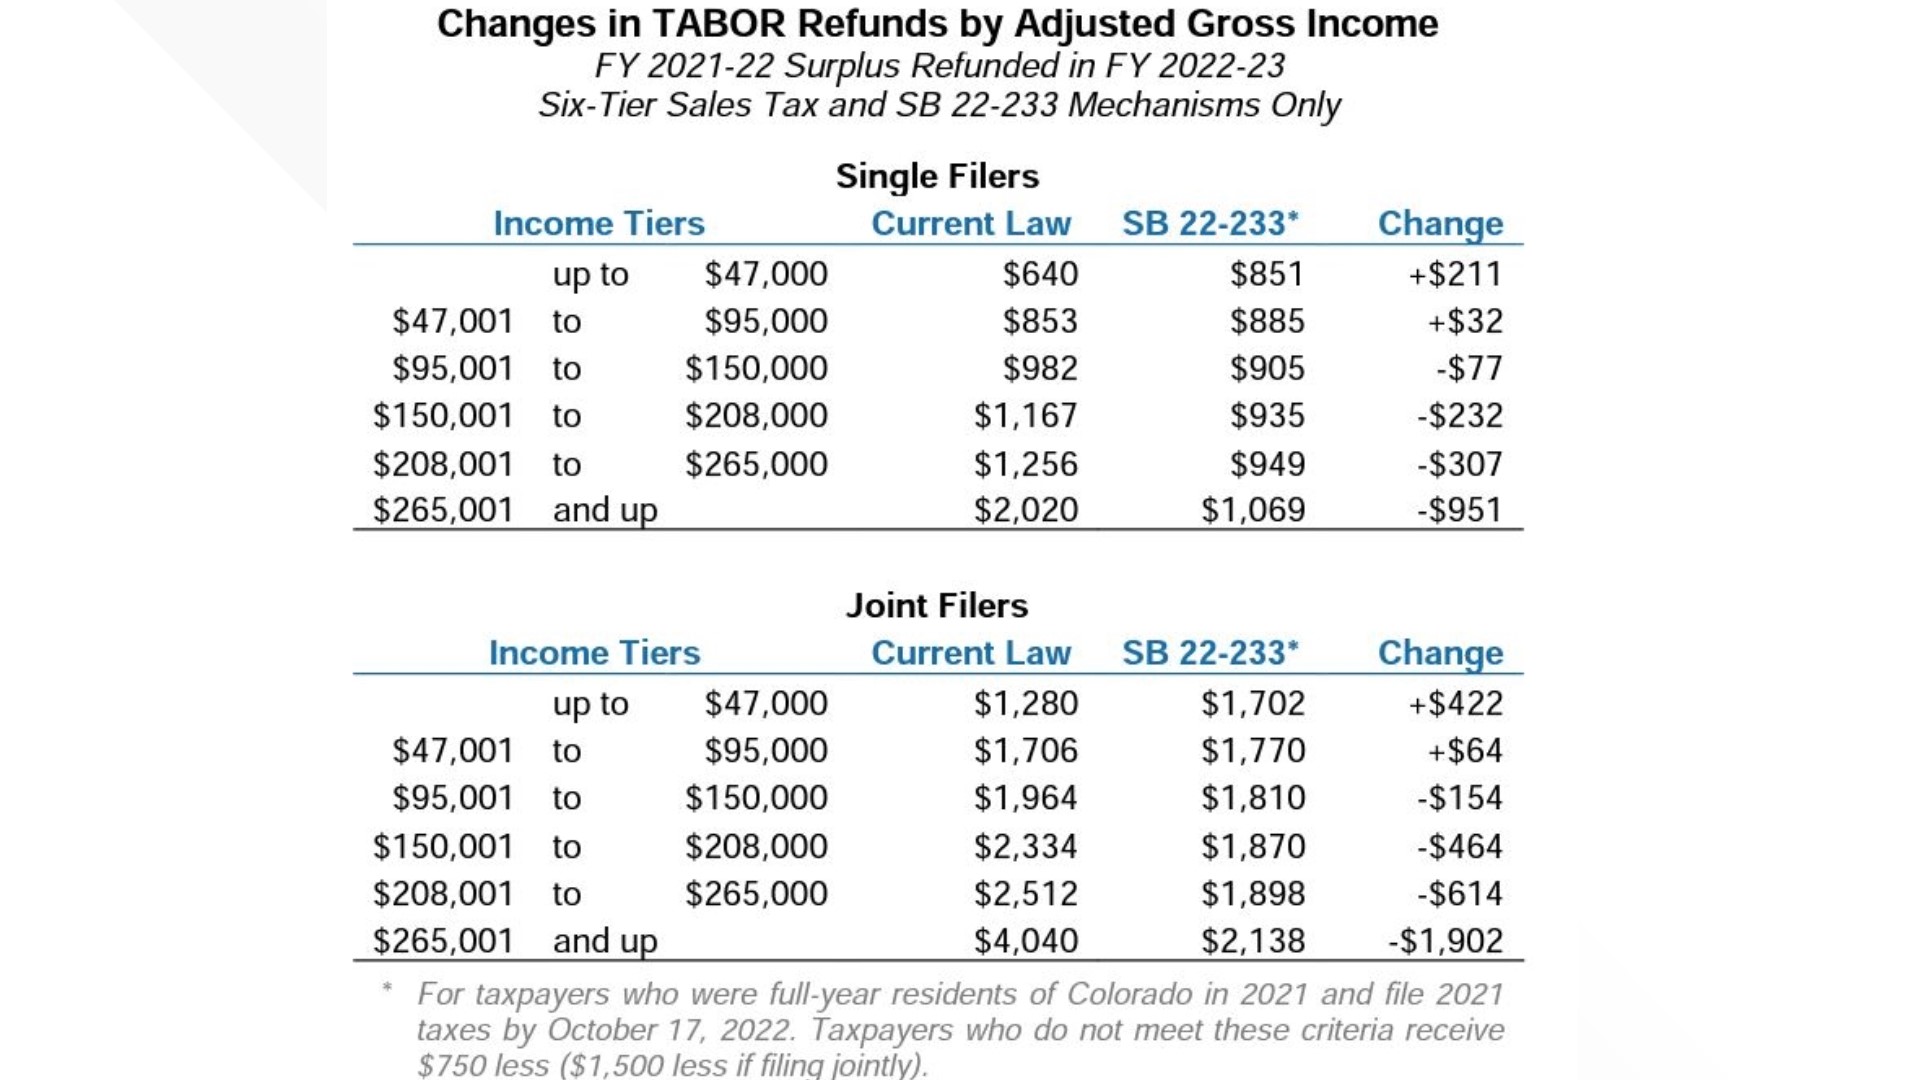 TABOR refund Low earners get more, high earners get less